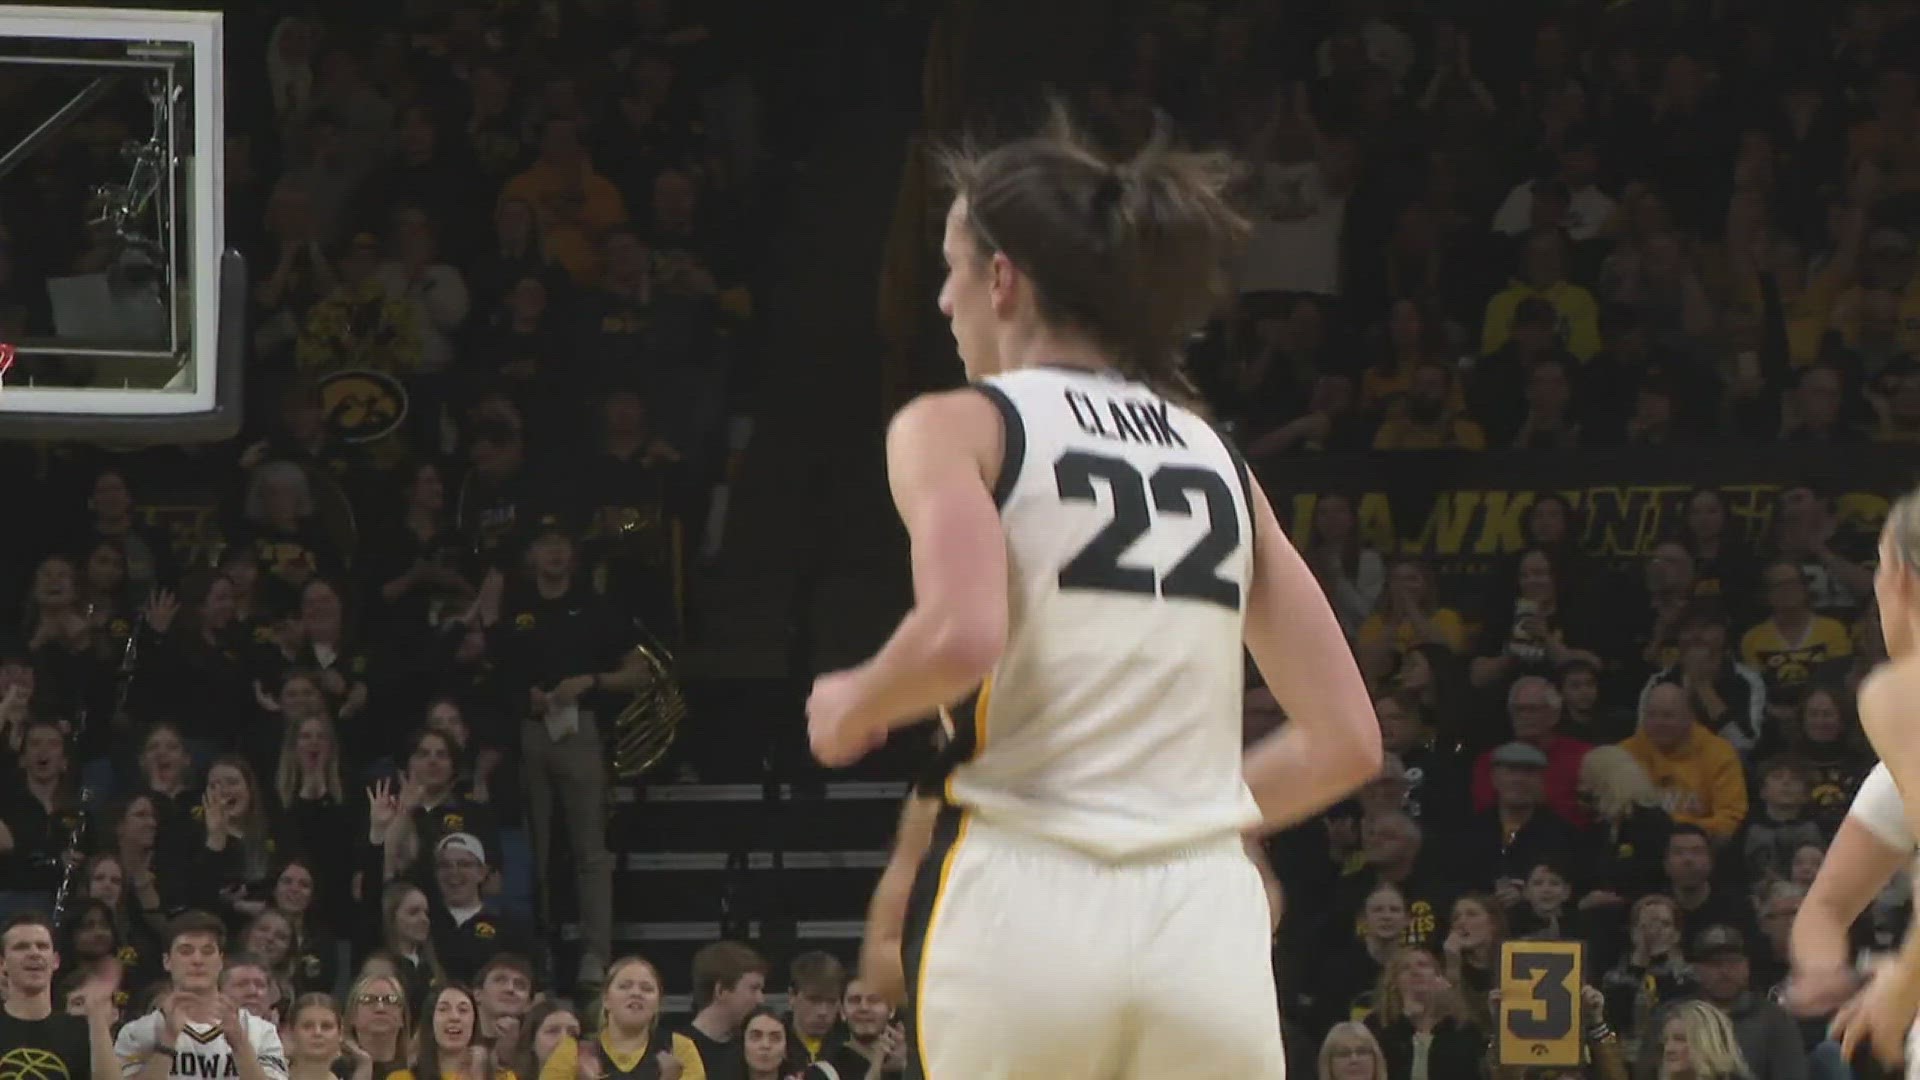 As the Hawkeye standout prepares for the start of her WNBA career, one big question remains over her Olympic future.